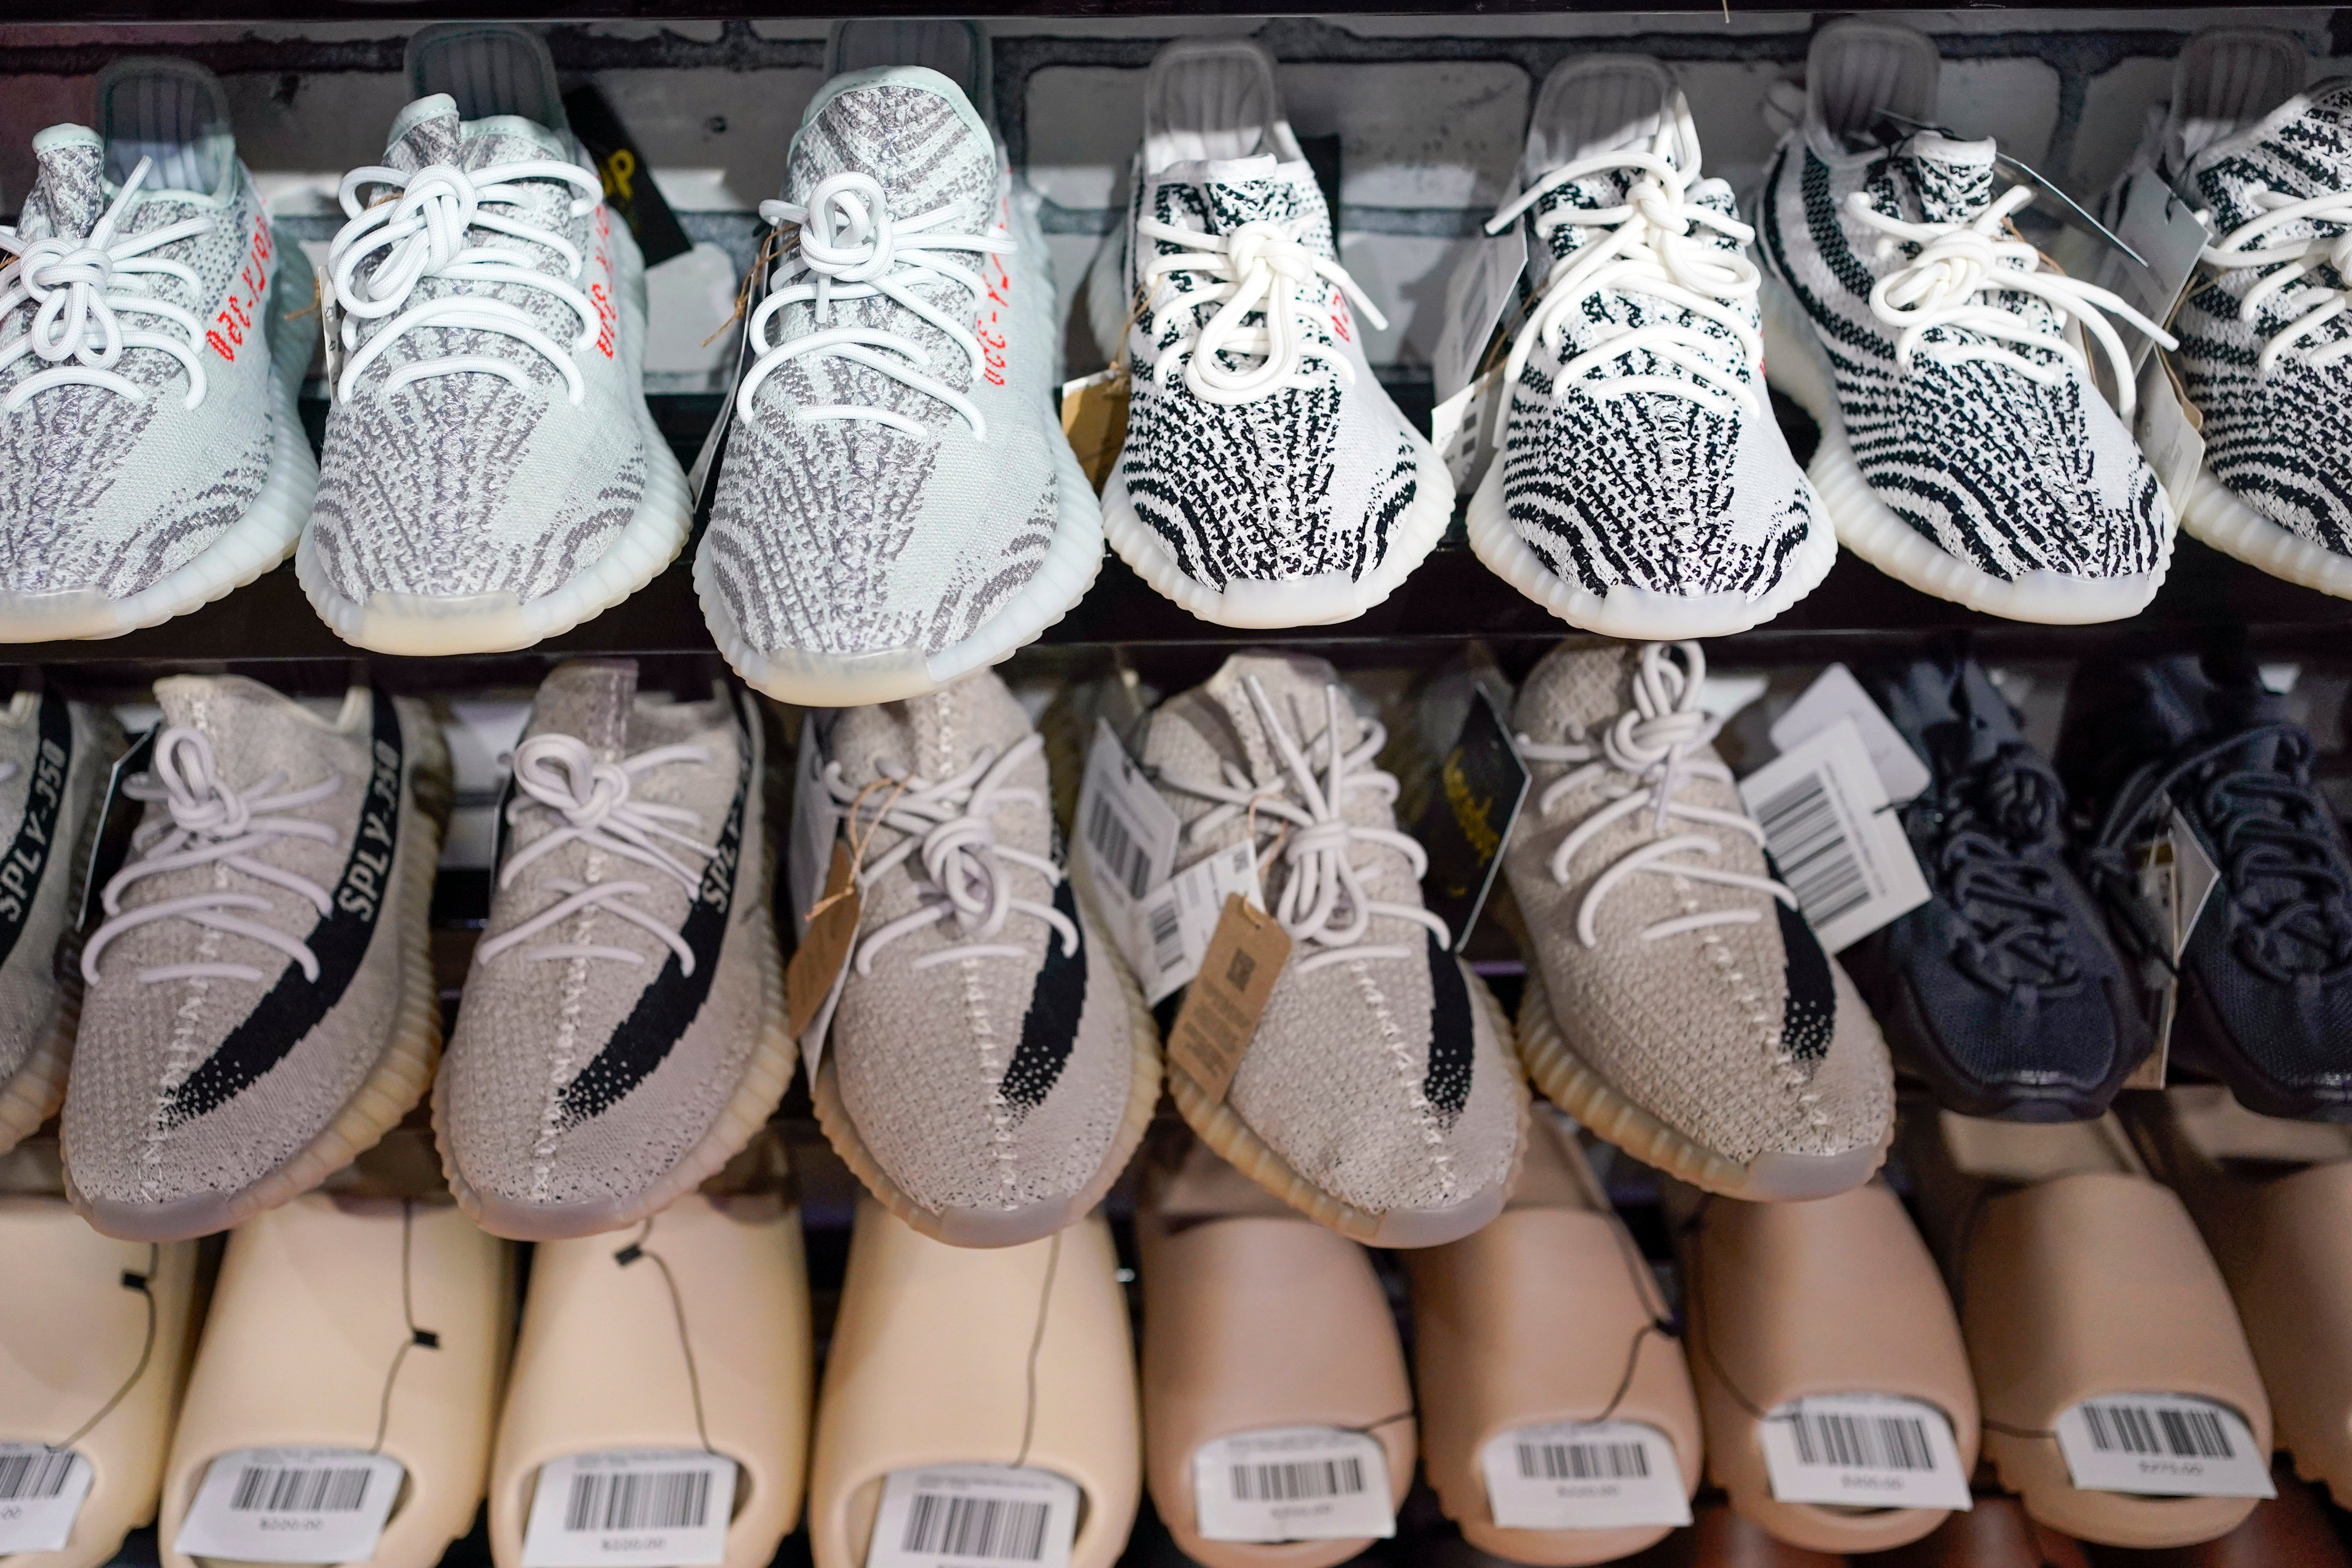 Yeezy shoes made by Adidas are displayed at Laced Up, a sneaker resale store